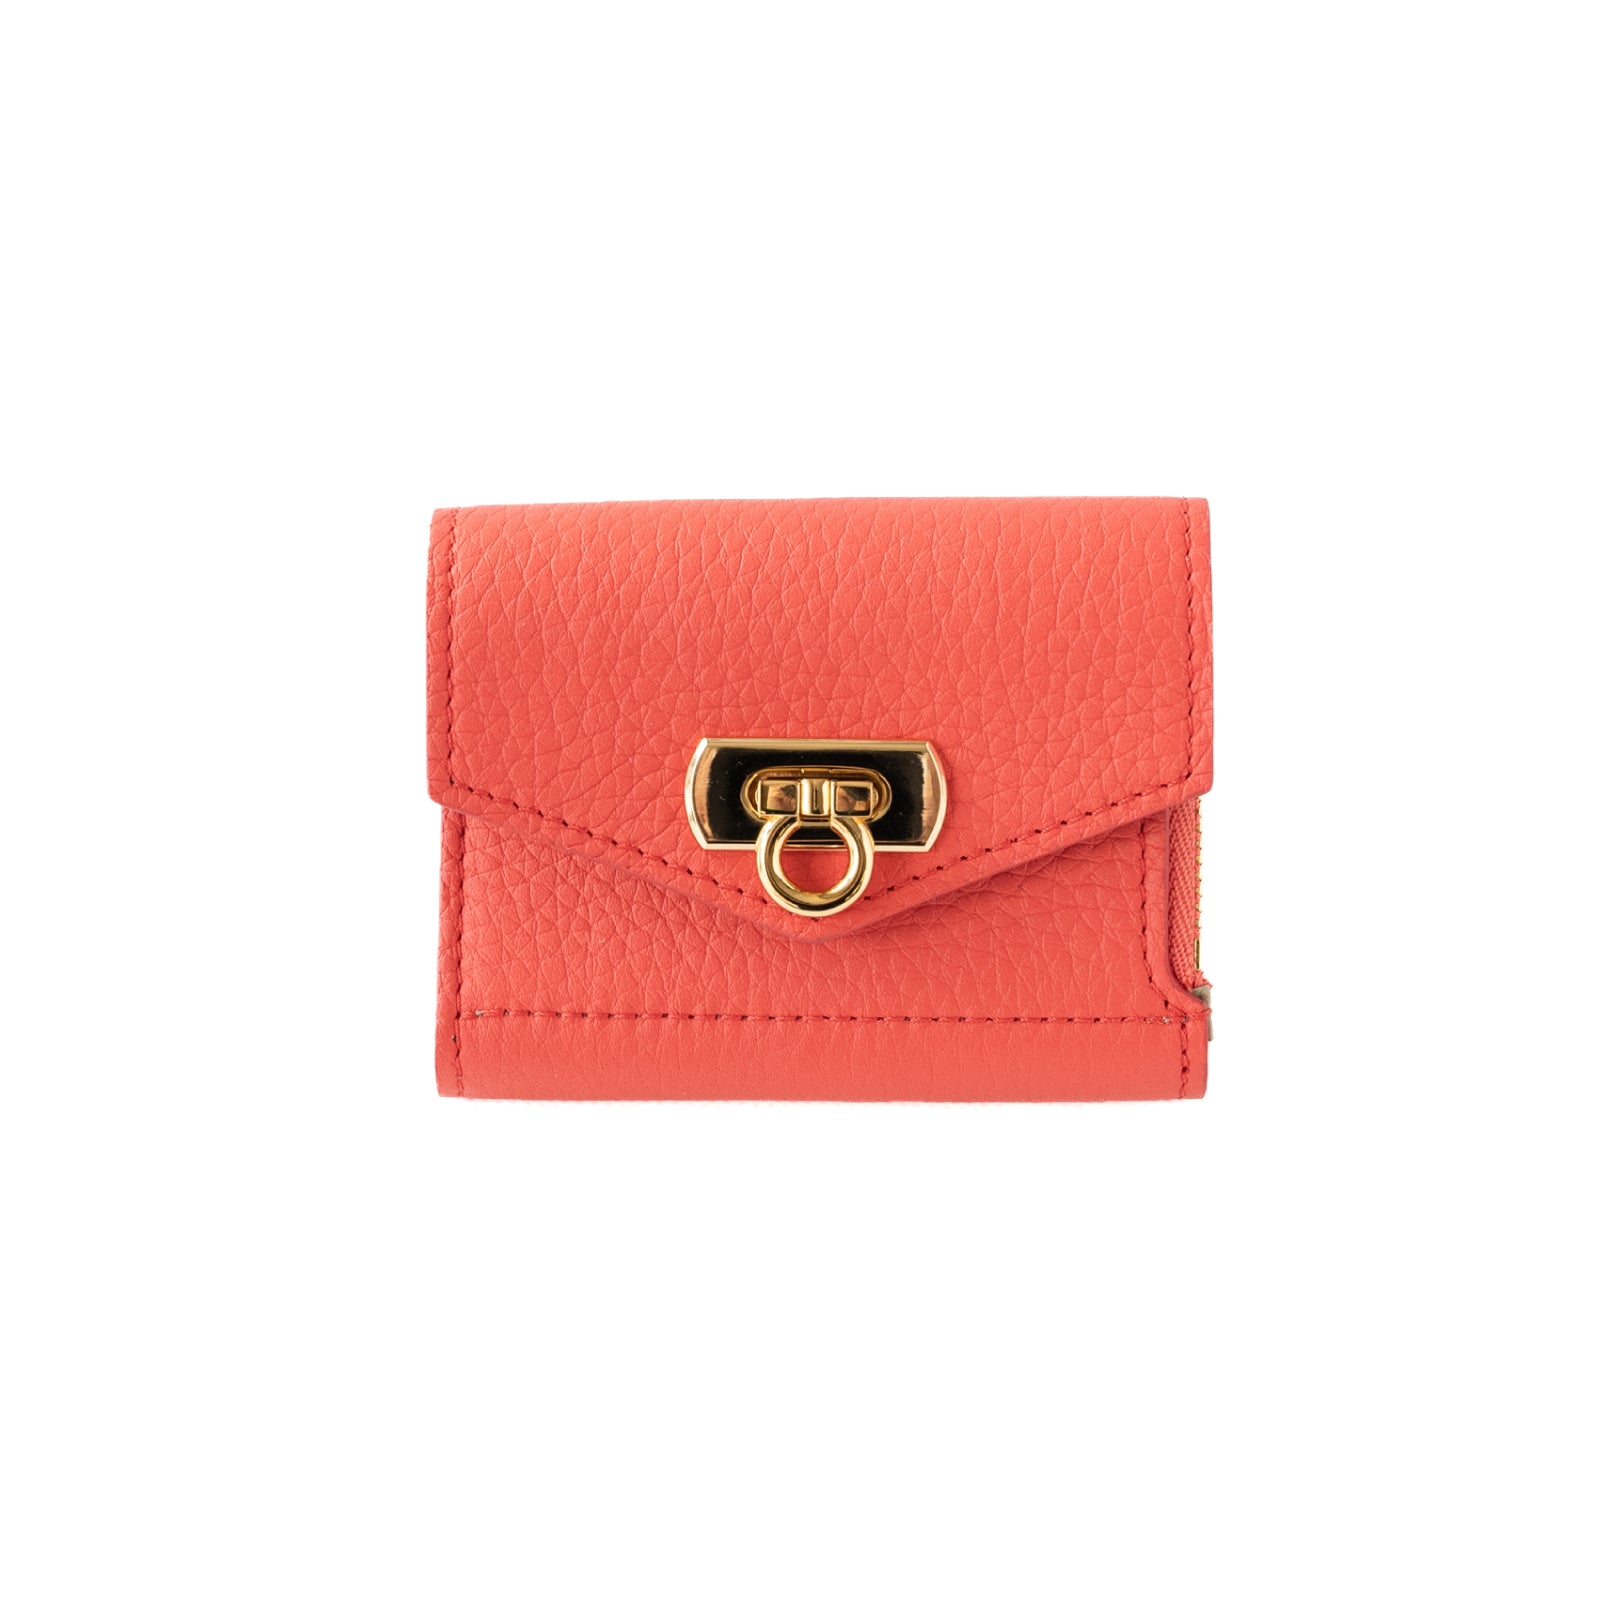 [Color order] Handy Wallet Opera Taurillon Clemence